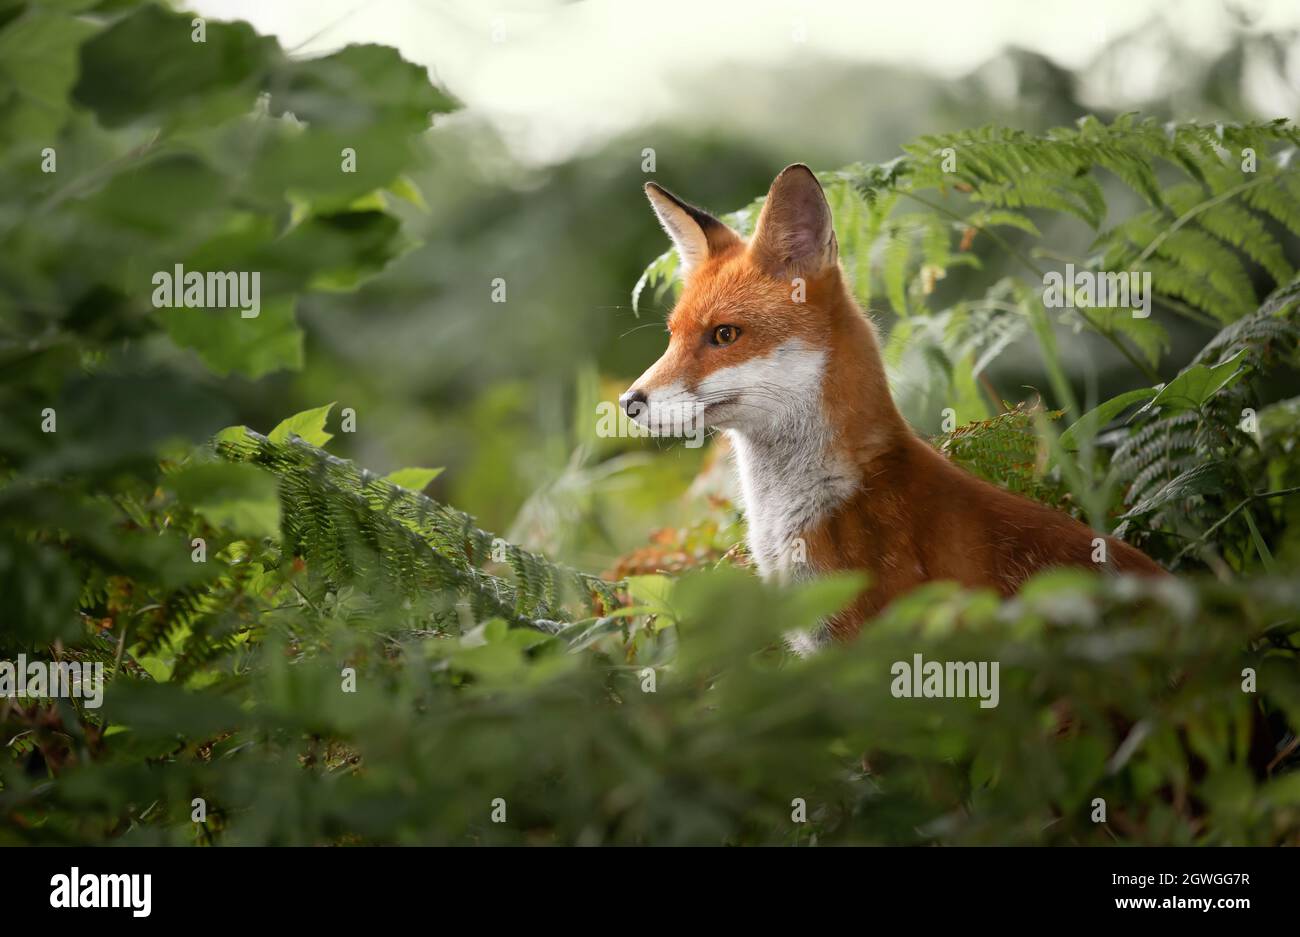 Close up of a Red fox (Vulpes vulpes) in ferns, UK. Stock Photo